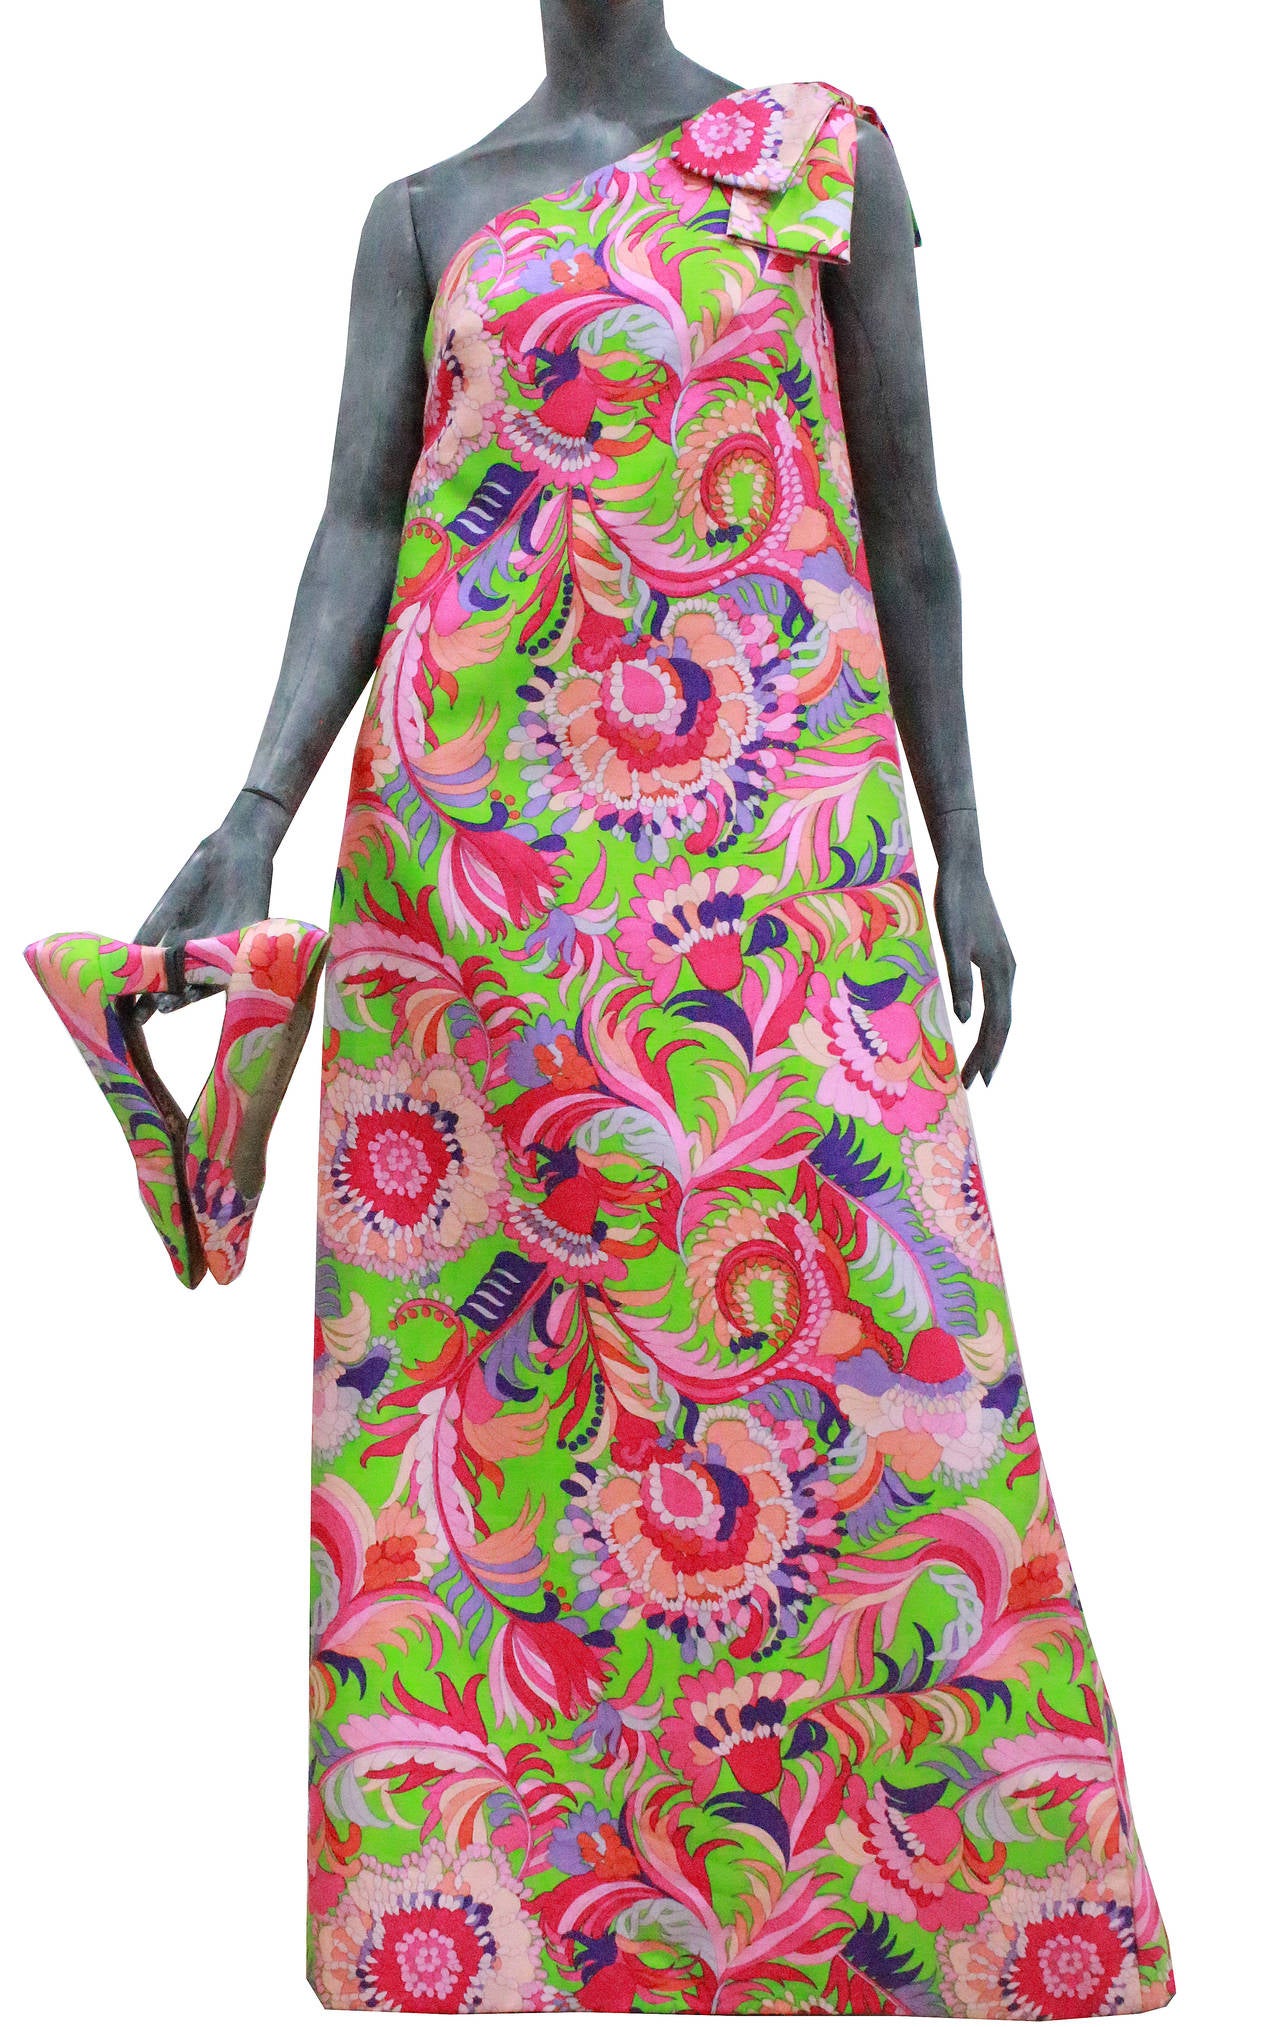 From 1958 to 1960 Bohan designed for the Christian Dior, London line. This dress is a great example of the beginning of a decade which changed the history of fashion.

This A Line dress features a kaleidoscope of colours which together to create a